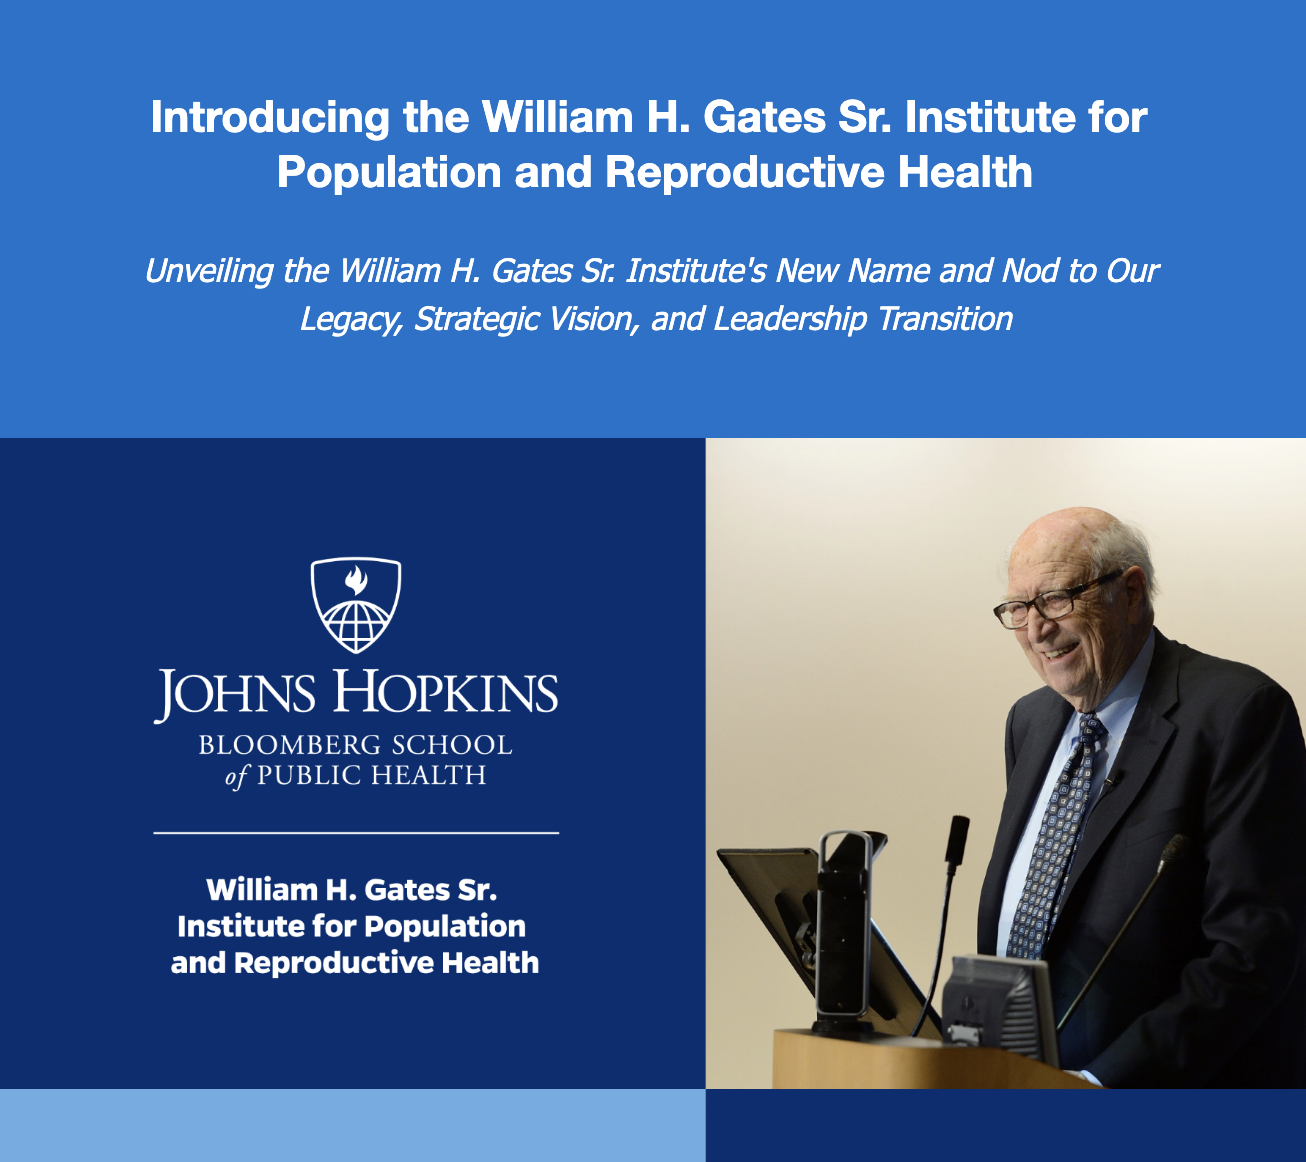 Bloomberg School Honors William H. Gates Sr. with New Name for Gates Institute for Population and Reproductive Health 